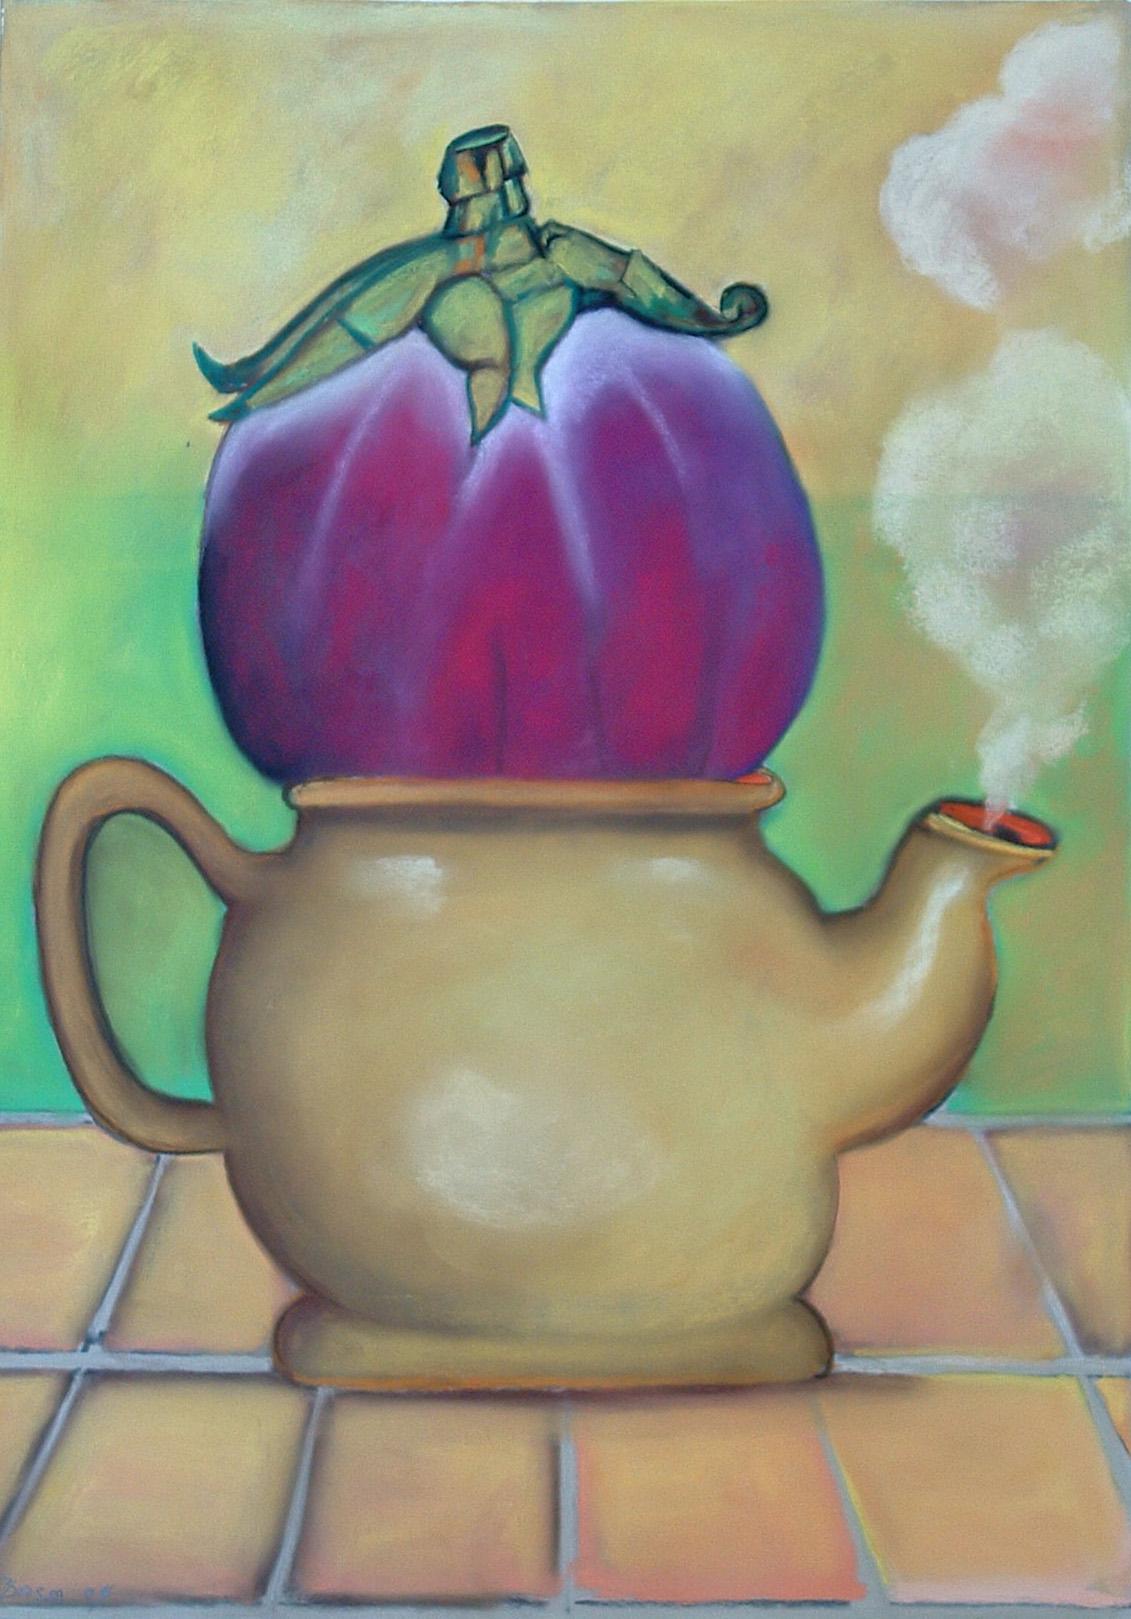 Steamed Eggplant  still life with sicilian eggplant and mustard color kettle - Art by Stephen Basso